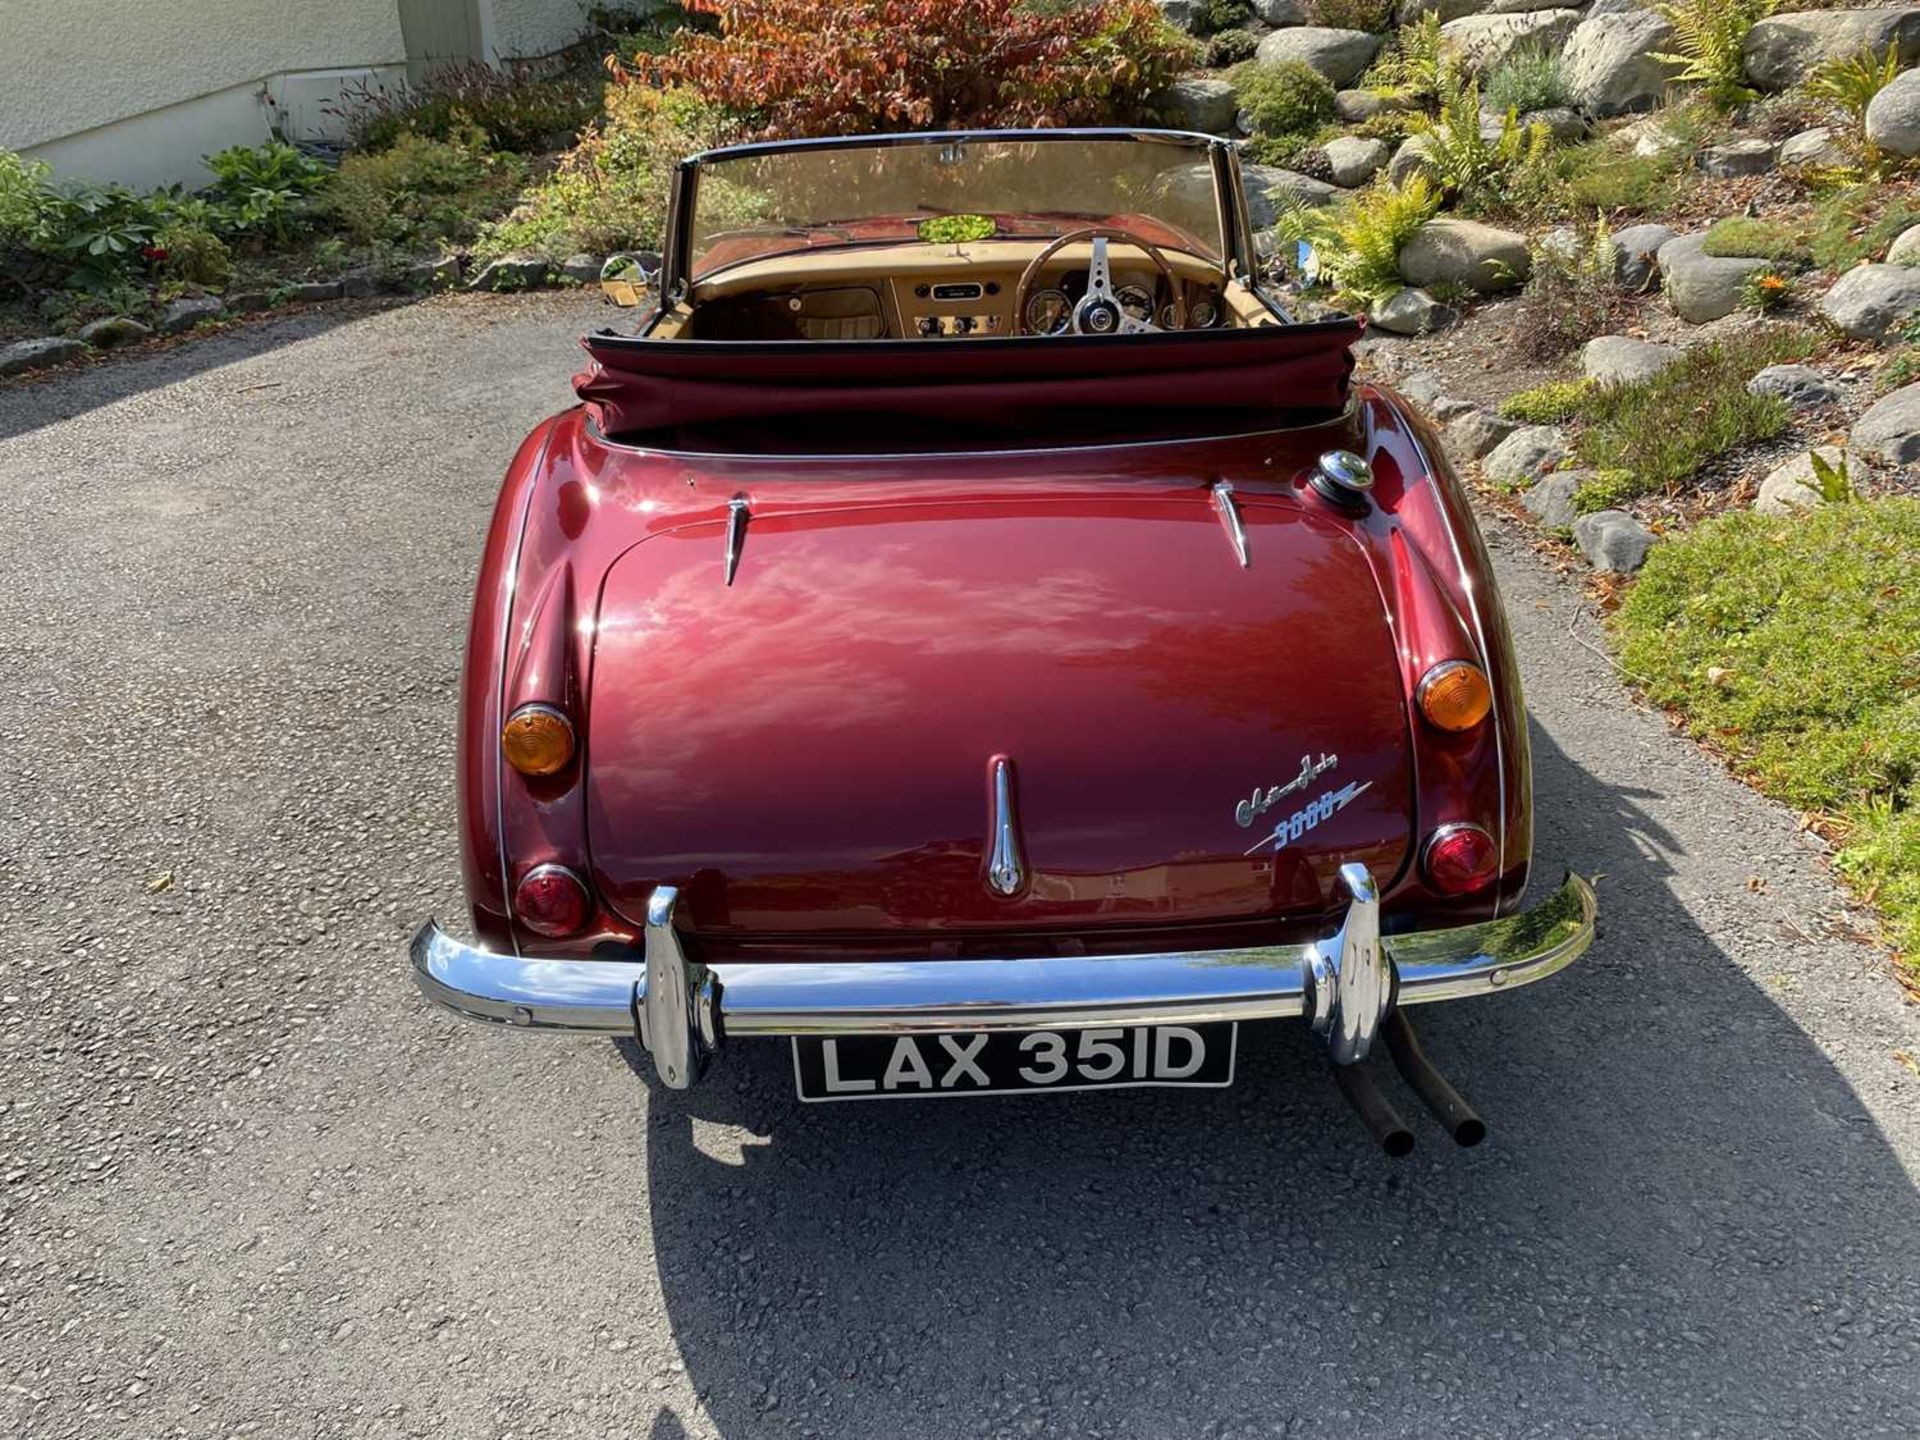 1965 Austin-Healey 3000 MKIII Phase 2 Offered with an extensive history file and heritage certificat - Image 17 of 45